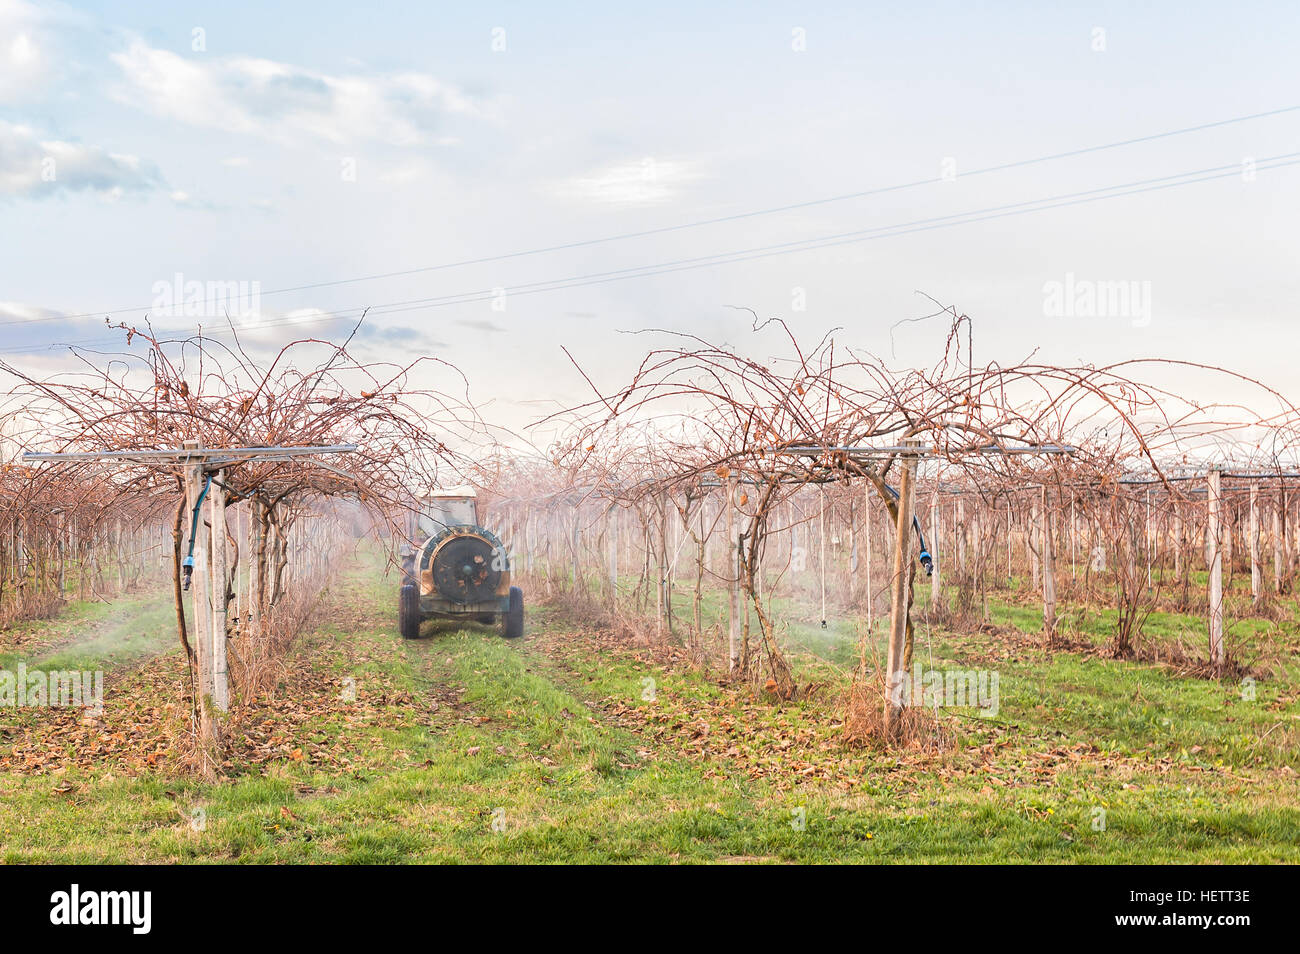 Agriculture work. Treatment pesticide to fruit trees. Kiwi trees. In a winter day. Stock Photo